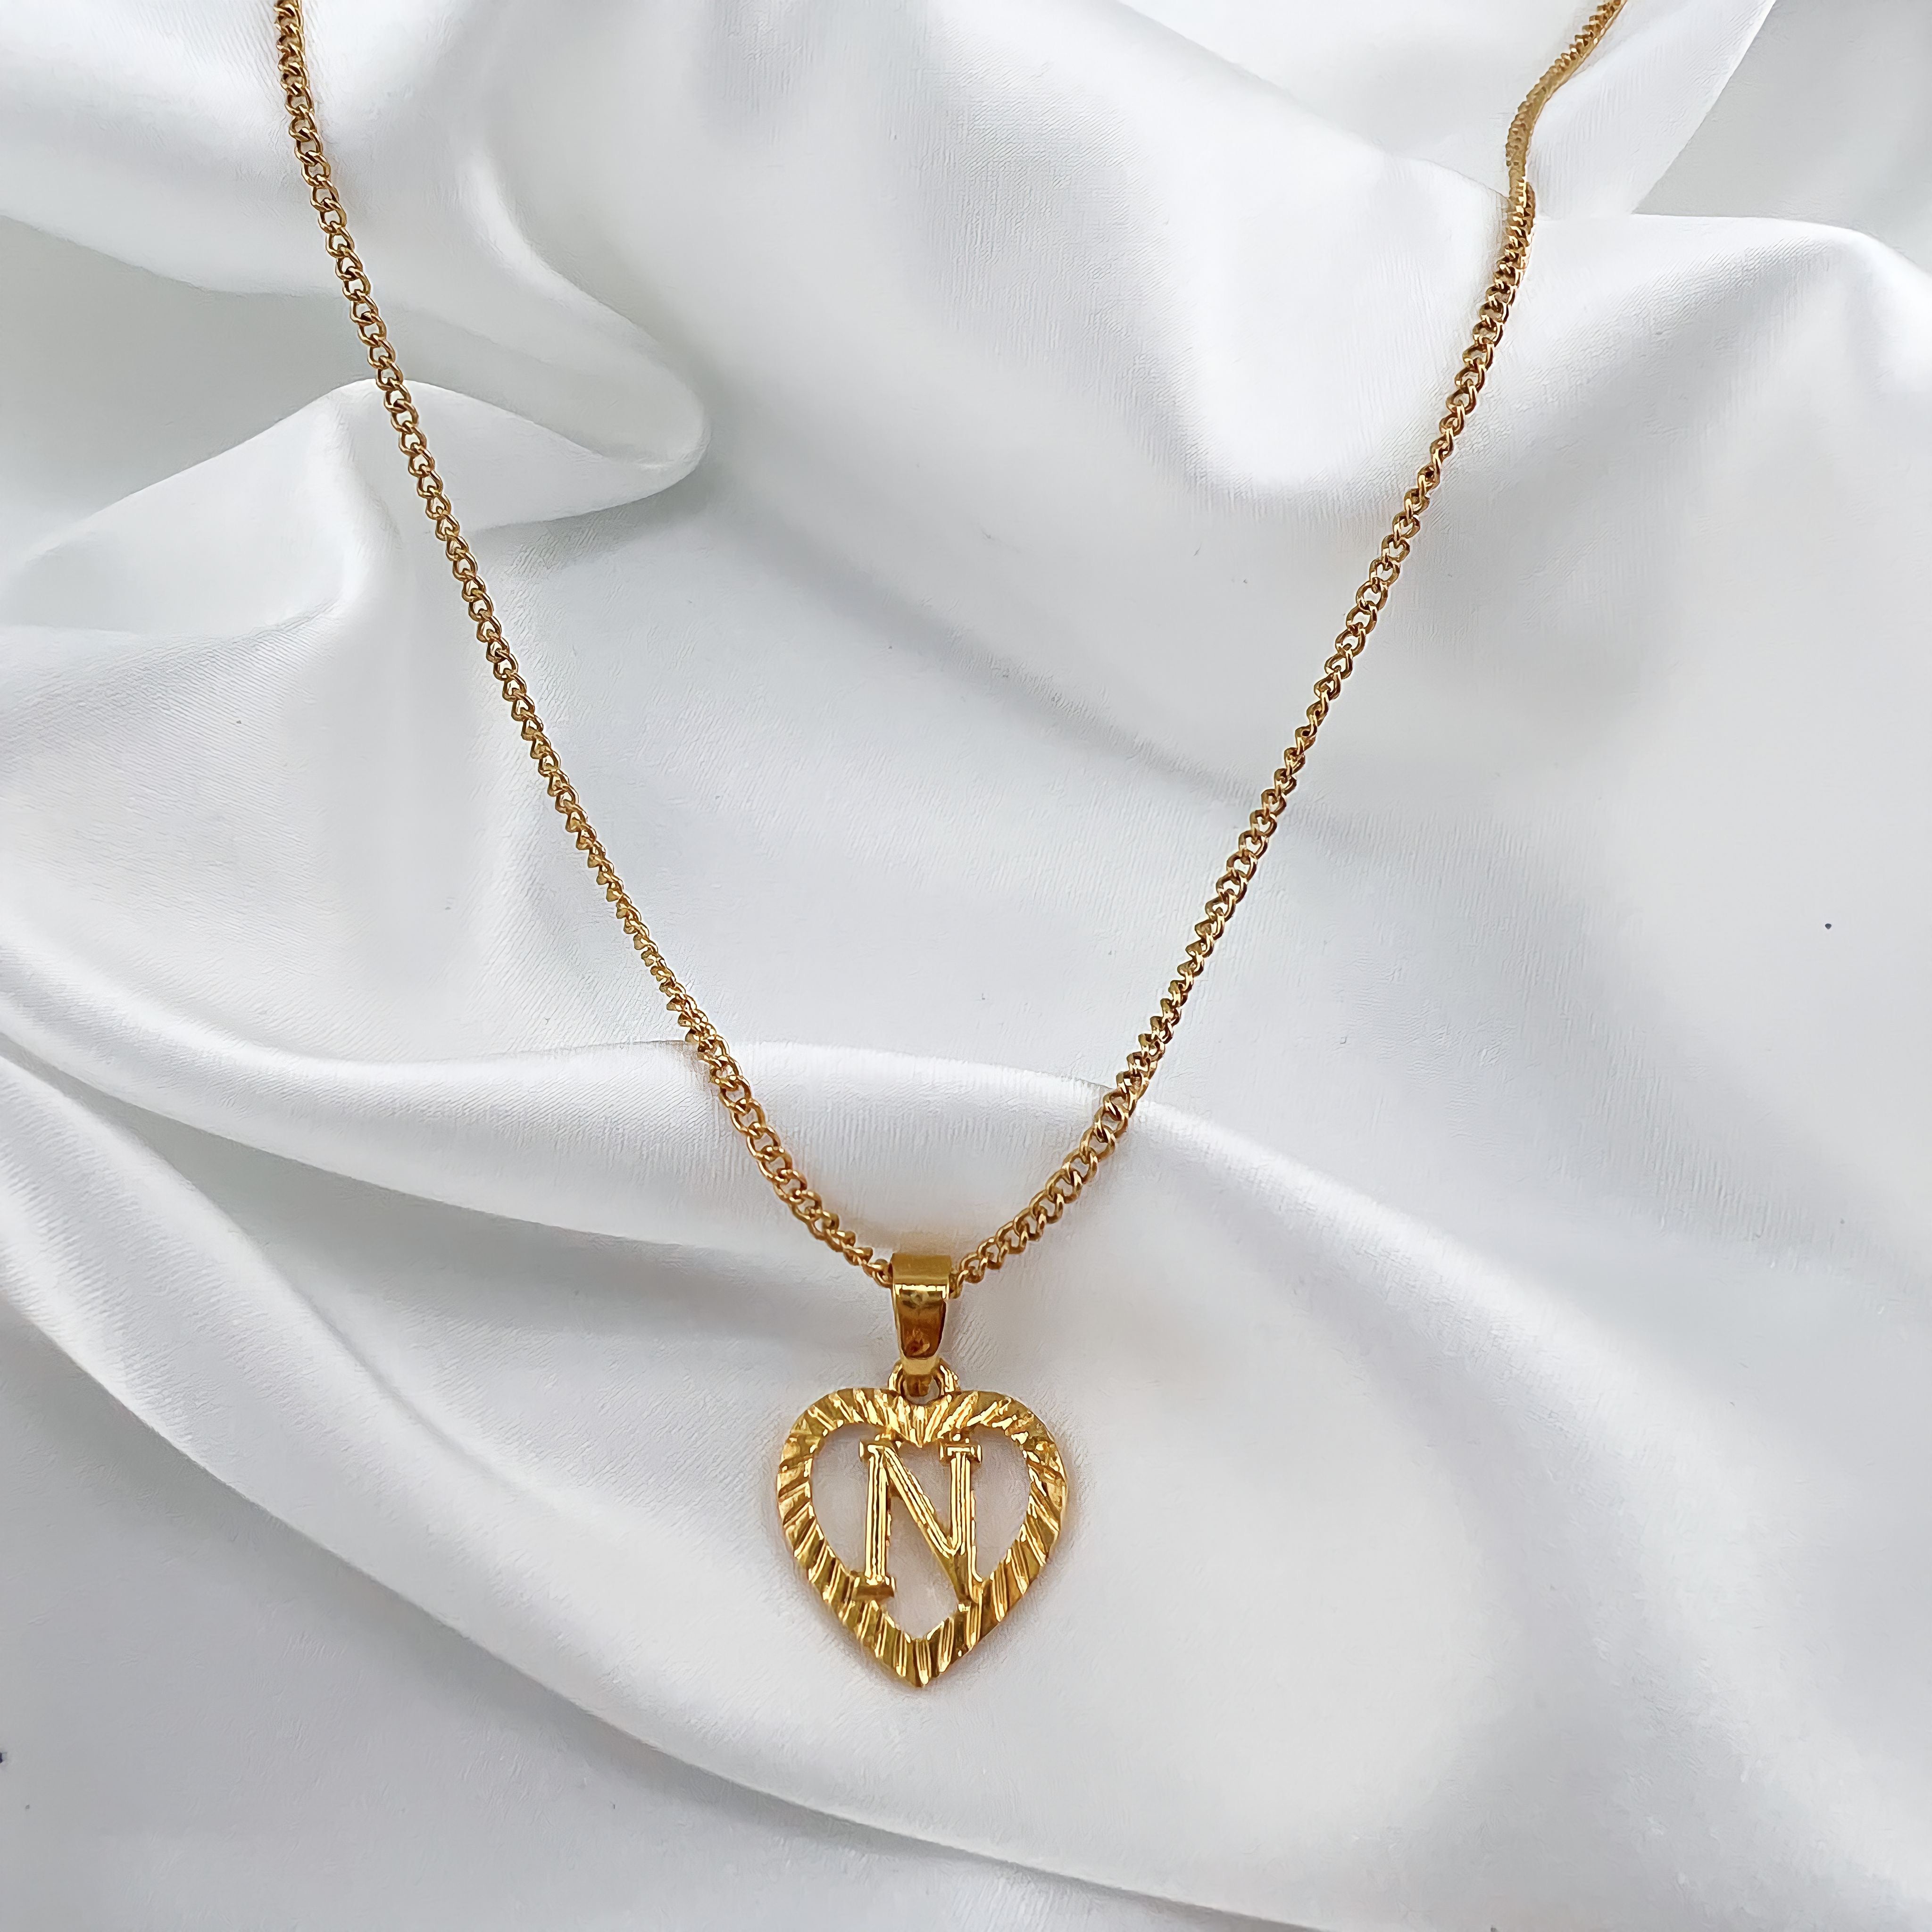 A-Z Luv Initials Necklace